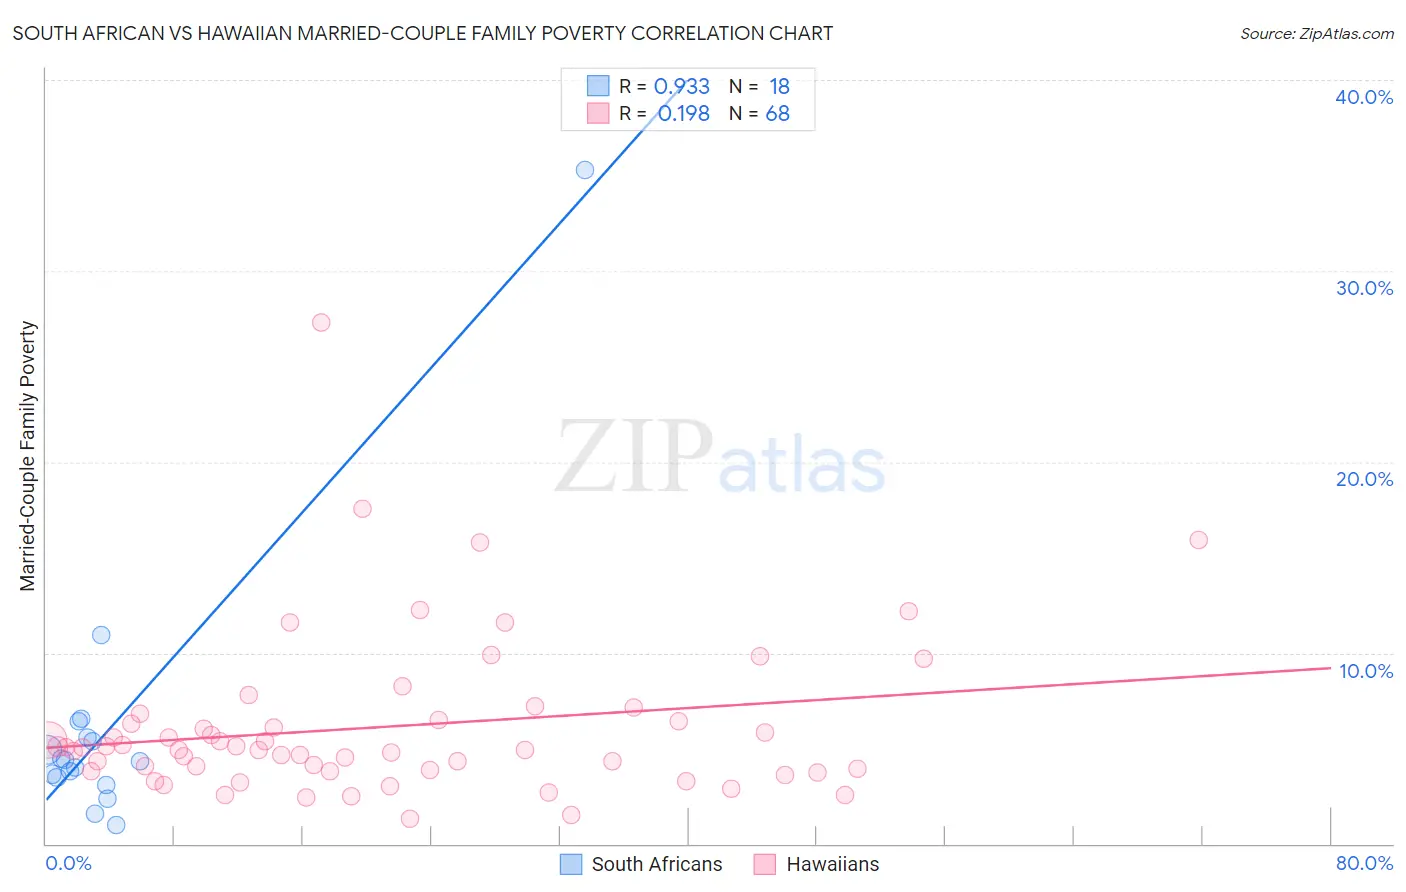 South African vs Hawaiian Married-Couple Family Poverty